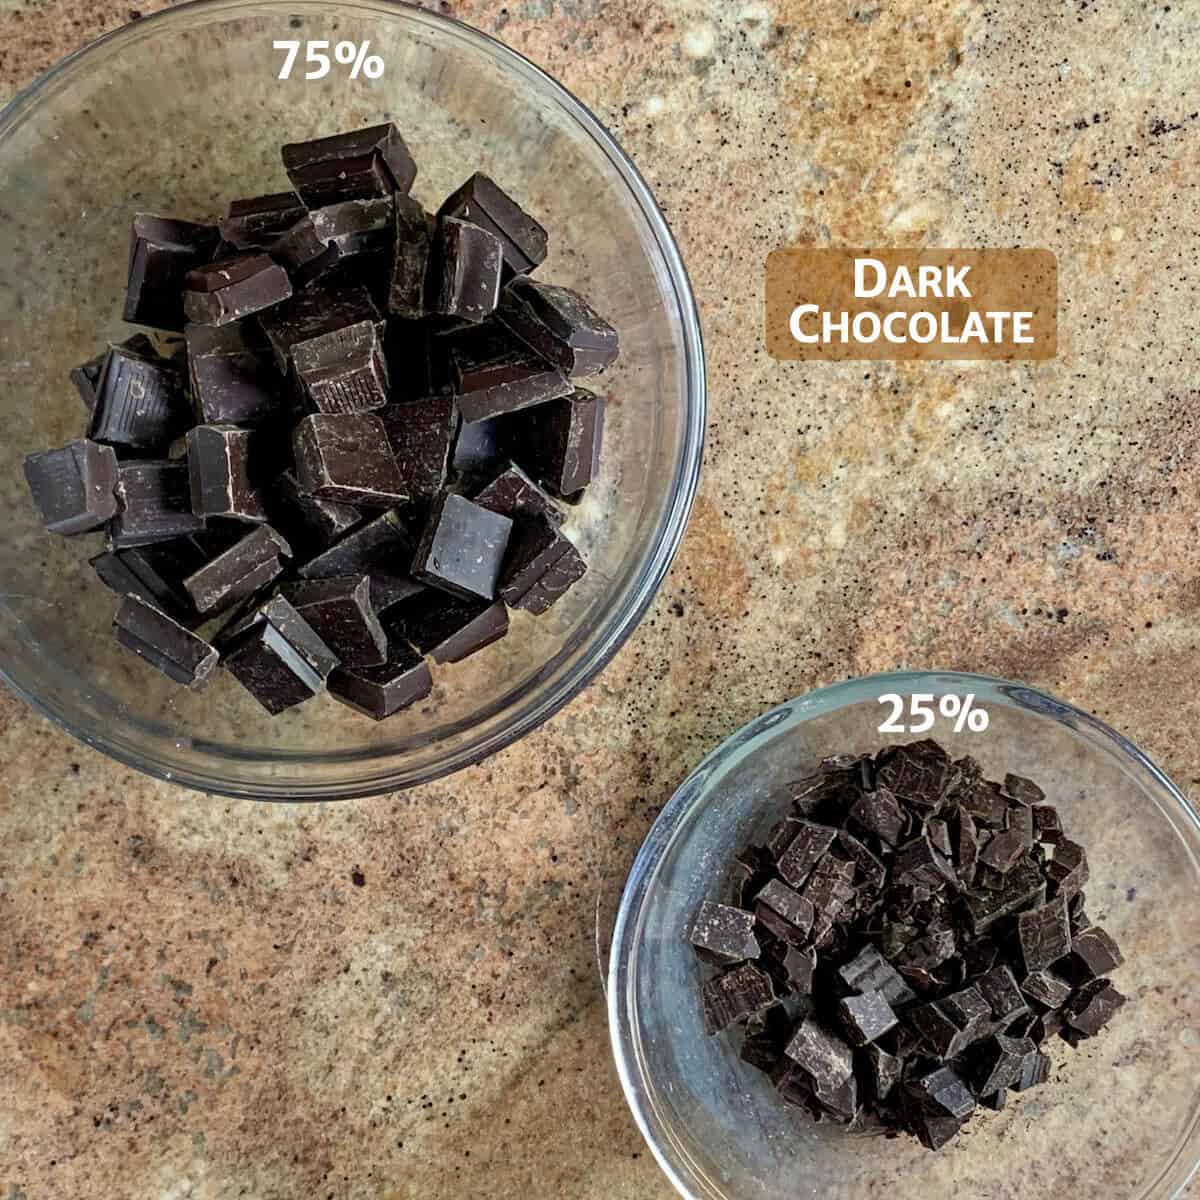 Chopped chocolate separated into 2 glass bowls.